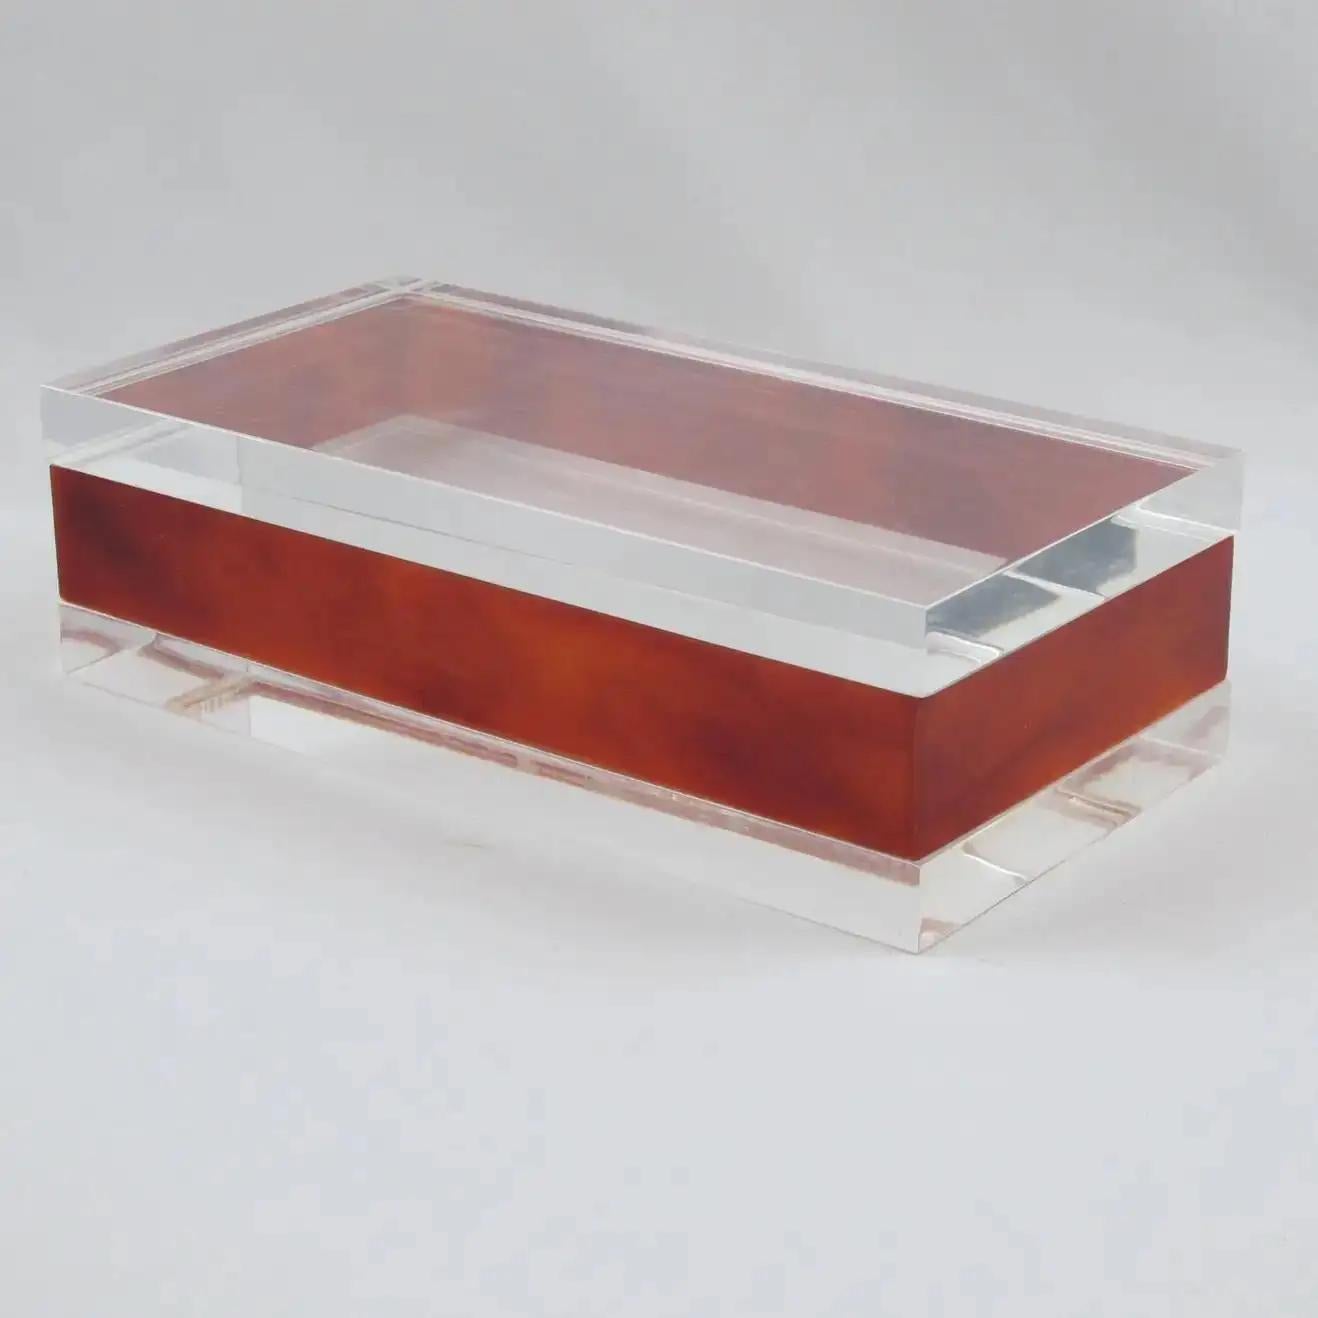 Red Amber and Clear Lucite Box, France 1970s For Sale 1